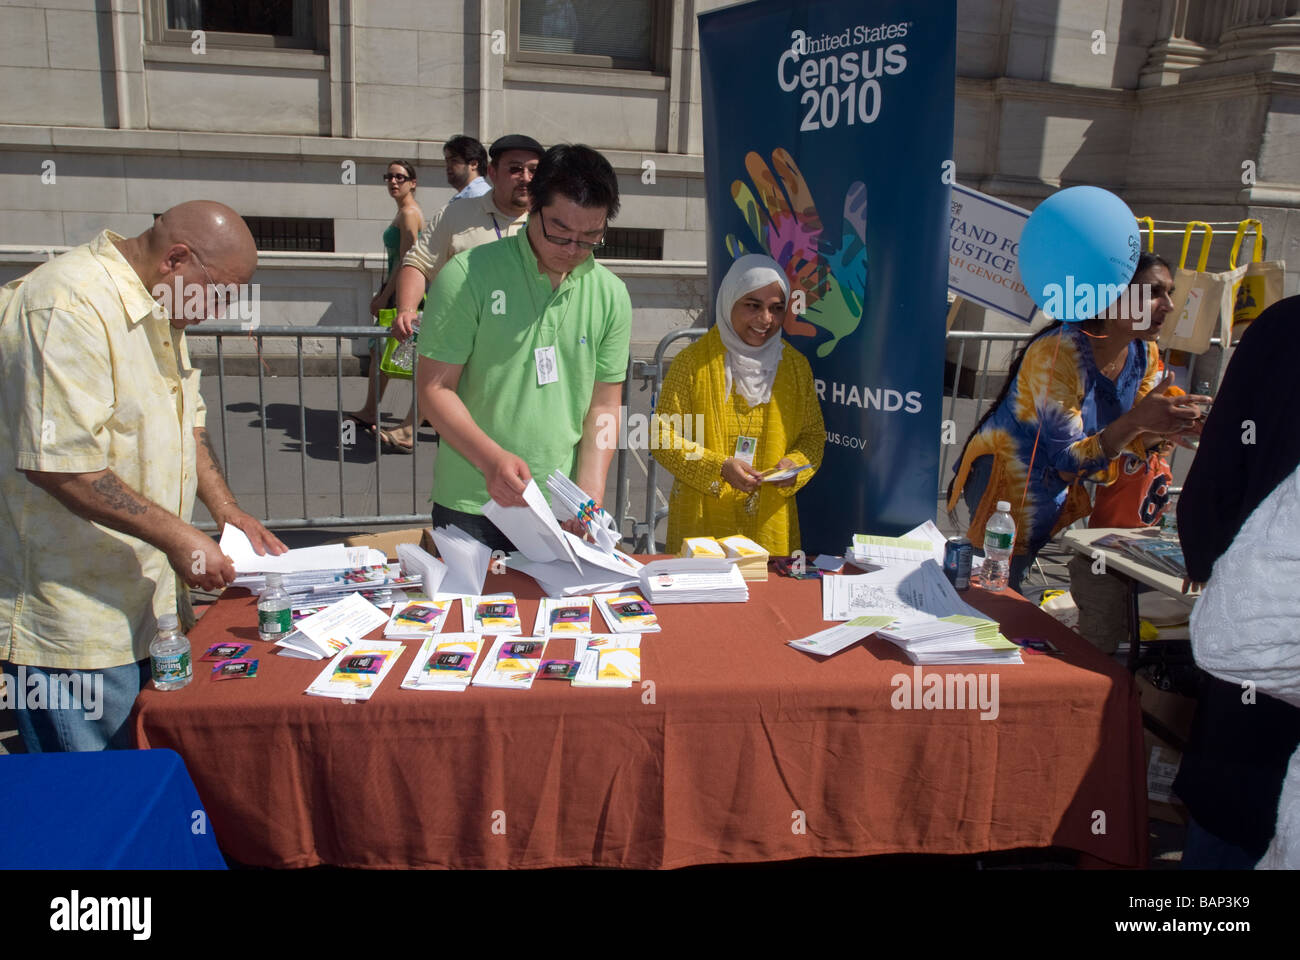 Representatives from the US Census 2010 at a table in the street fair in New York Stock Photo